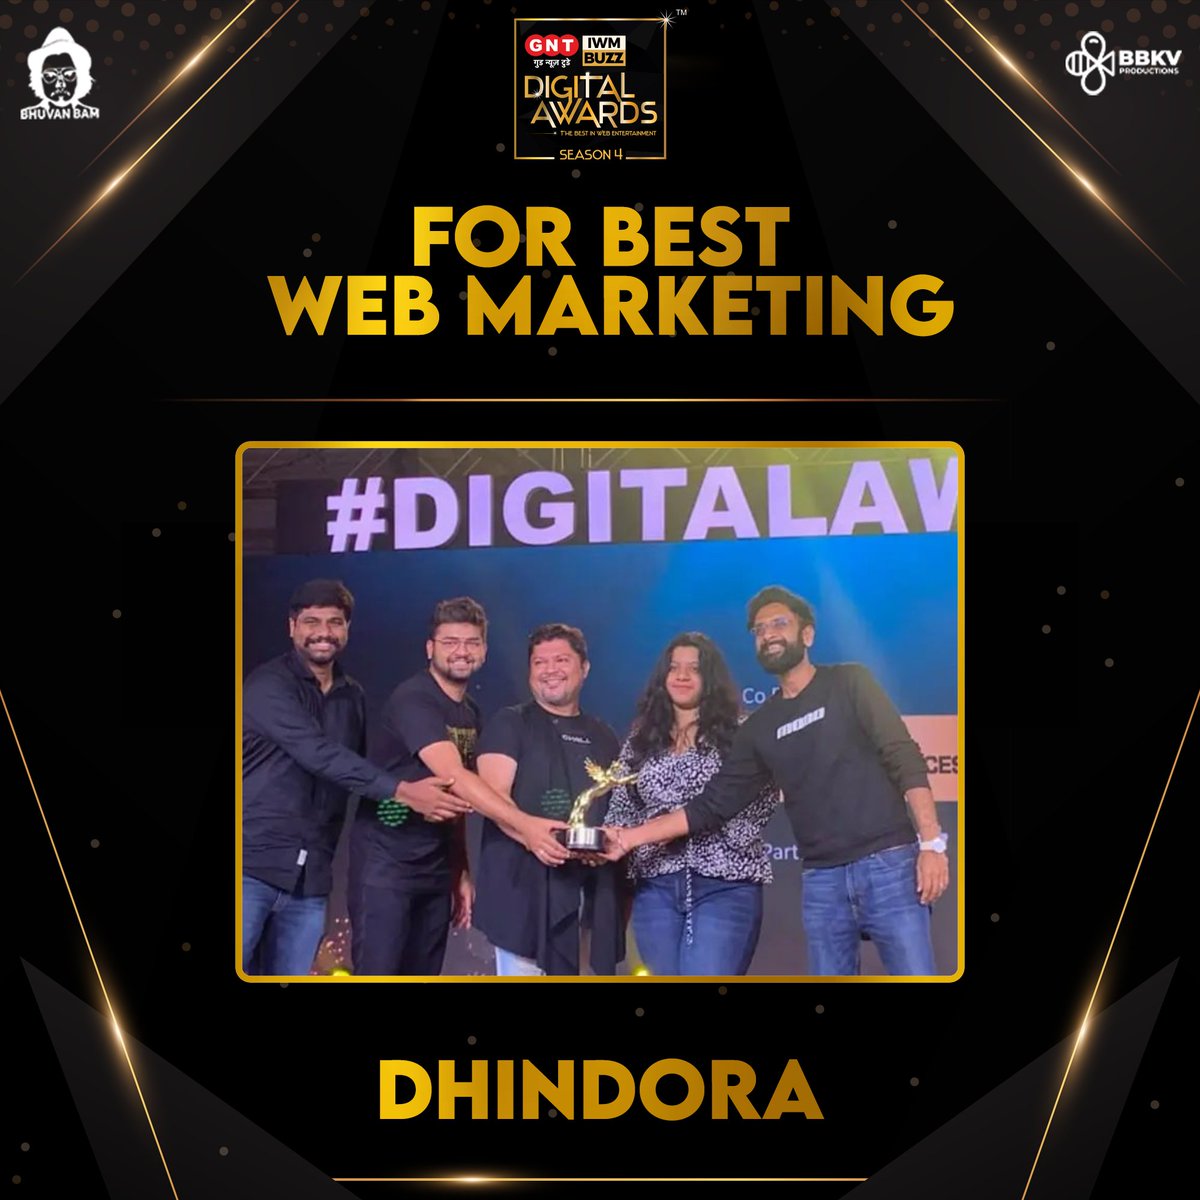 The Duo for Dhindora ✌️
#IWMBuzzDigitalAwards
The man himself is leading from the front with the Breakthrough Performer of the Year  @Bhuvan_Bam

And our bang on marketing team!

Congratulations everyone ❤️